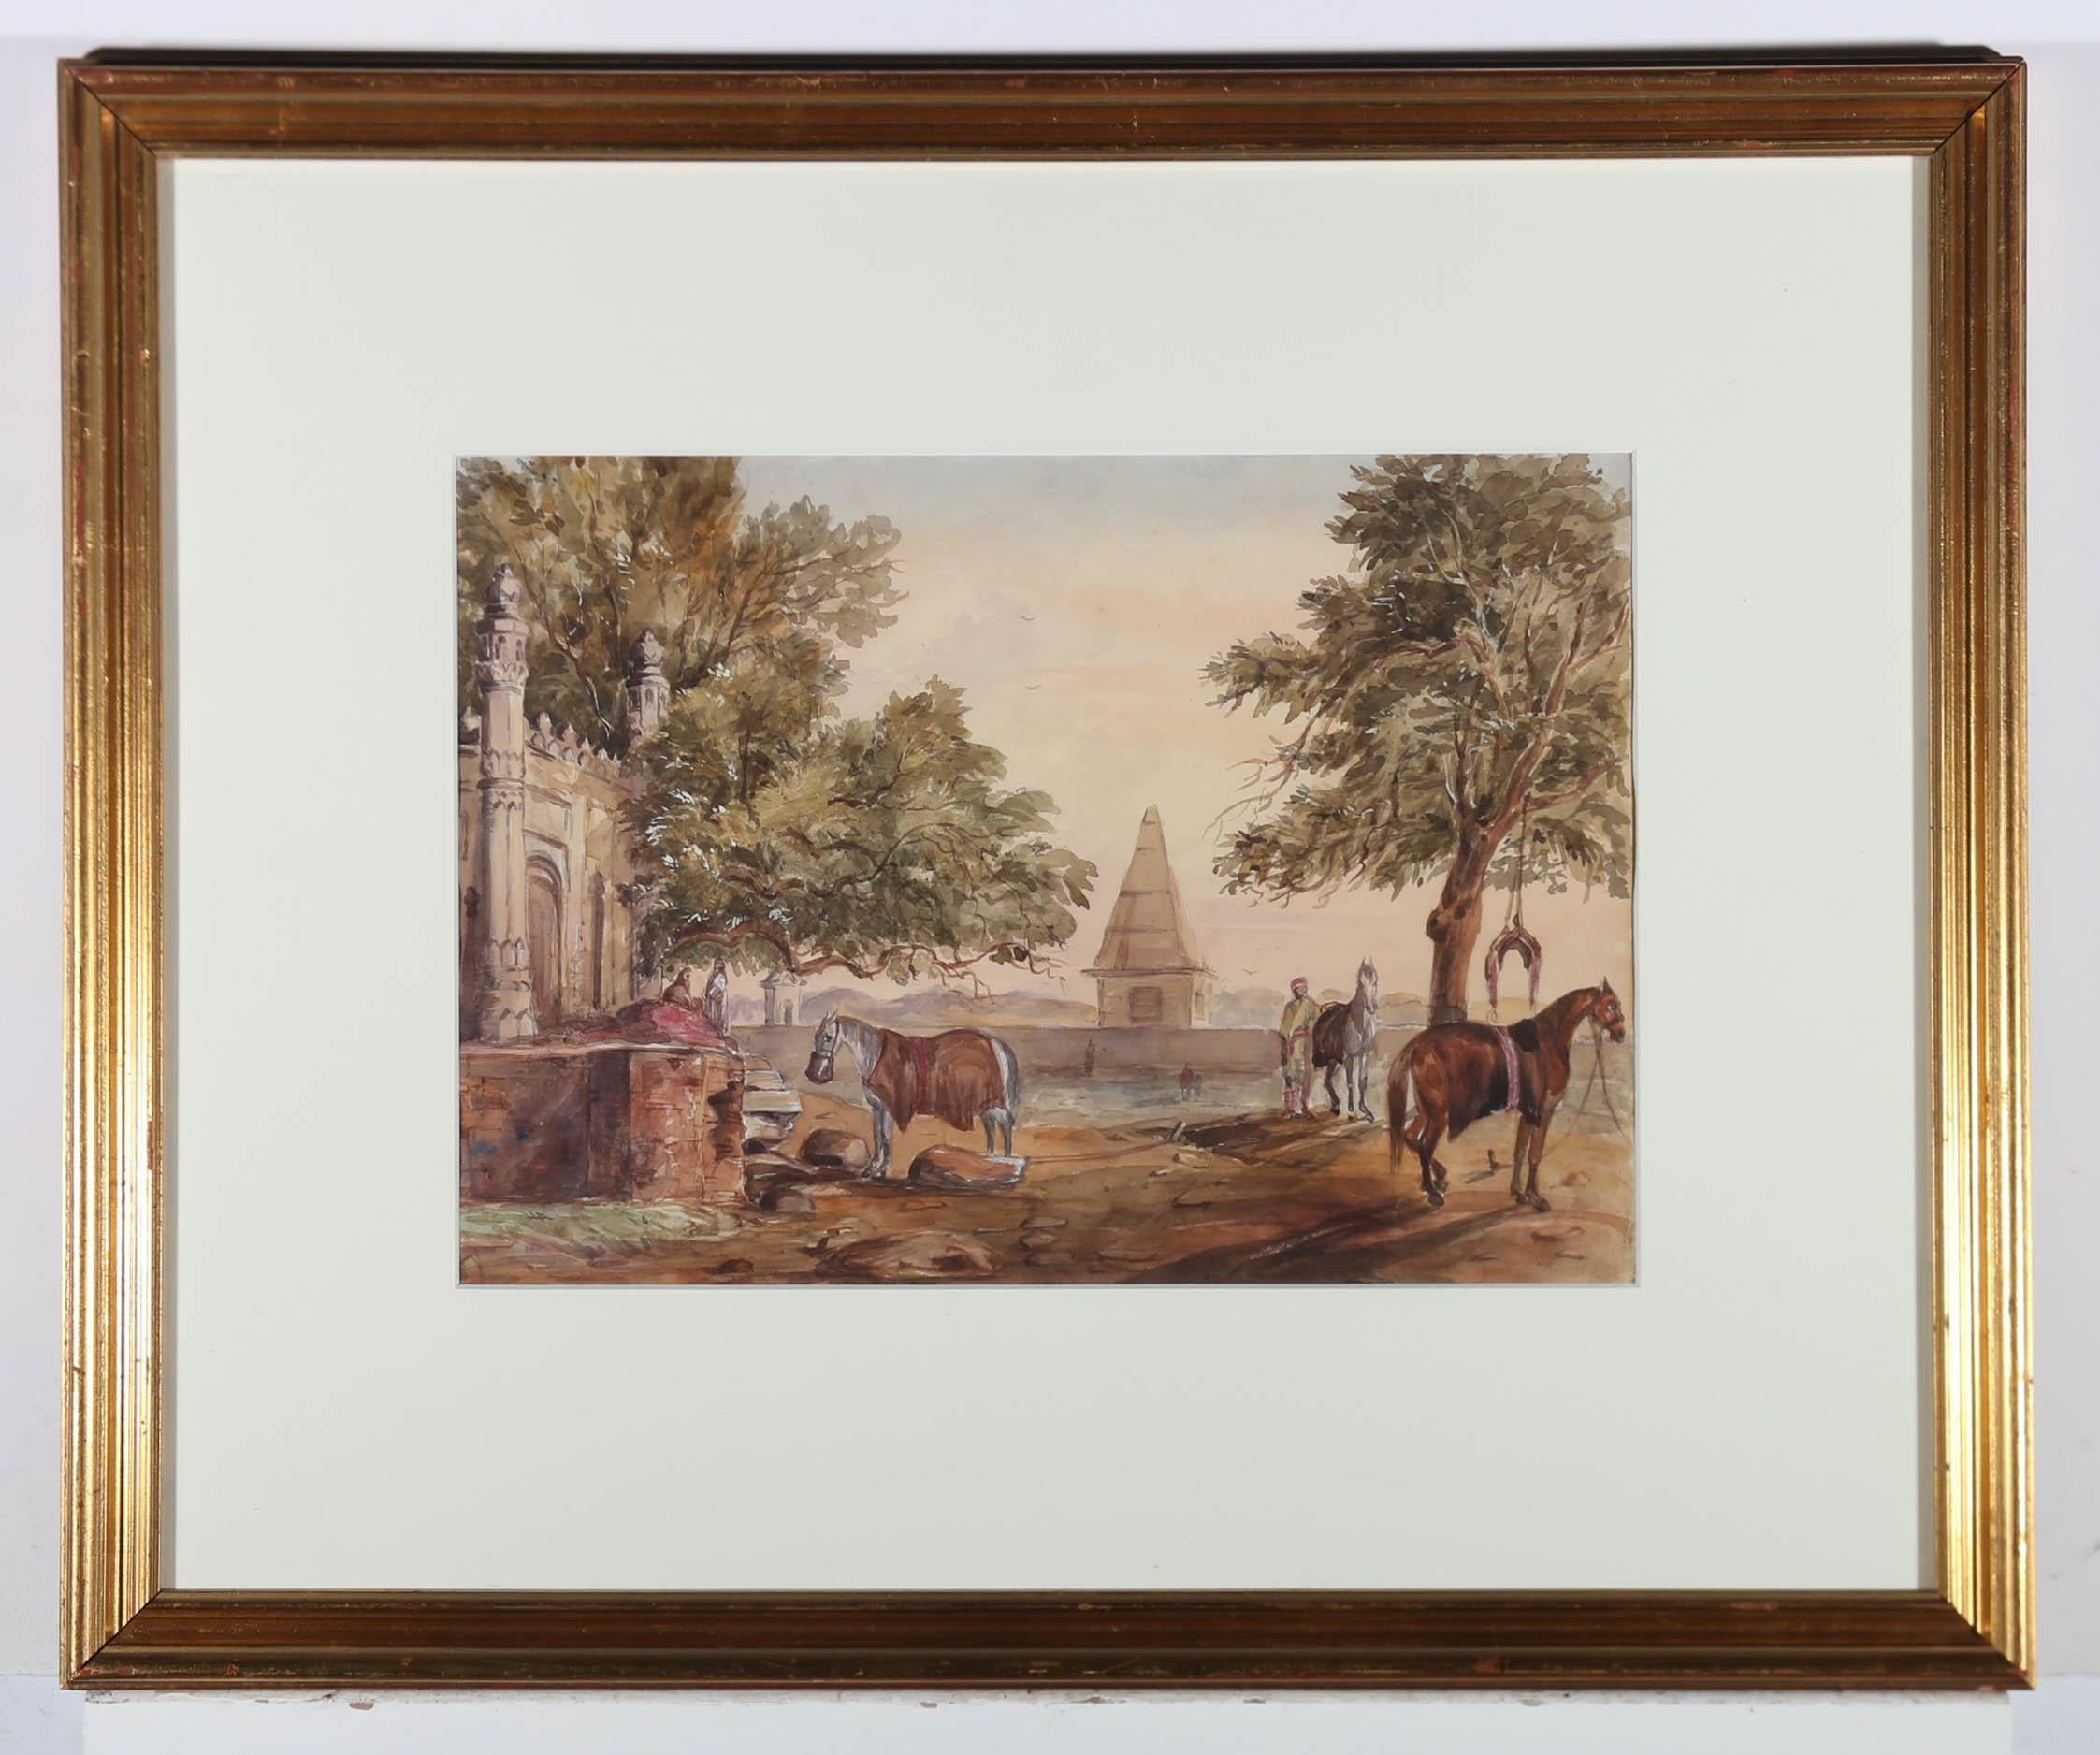 A charming late 19th century watercolour of Arabian horses resting with a groom in a middle eastern landscape. Unsigned. Elegantly presented in a contemporary gilt frame with a new card mount. On paper.